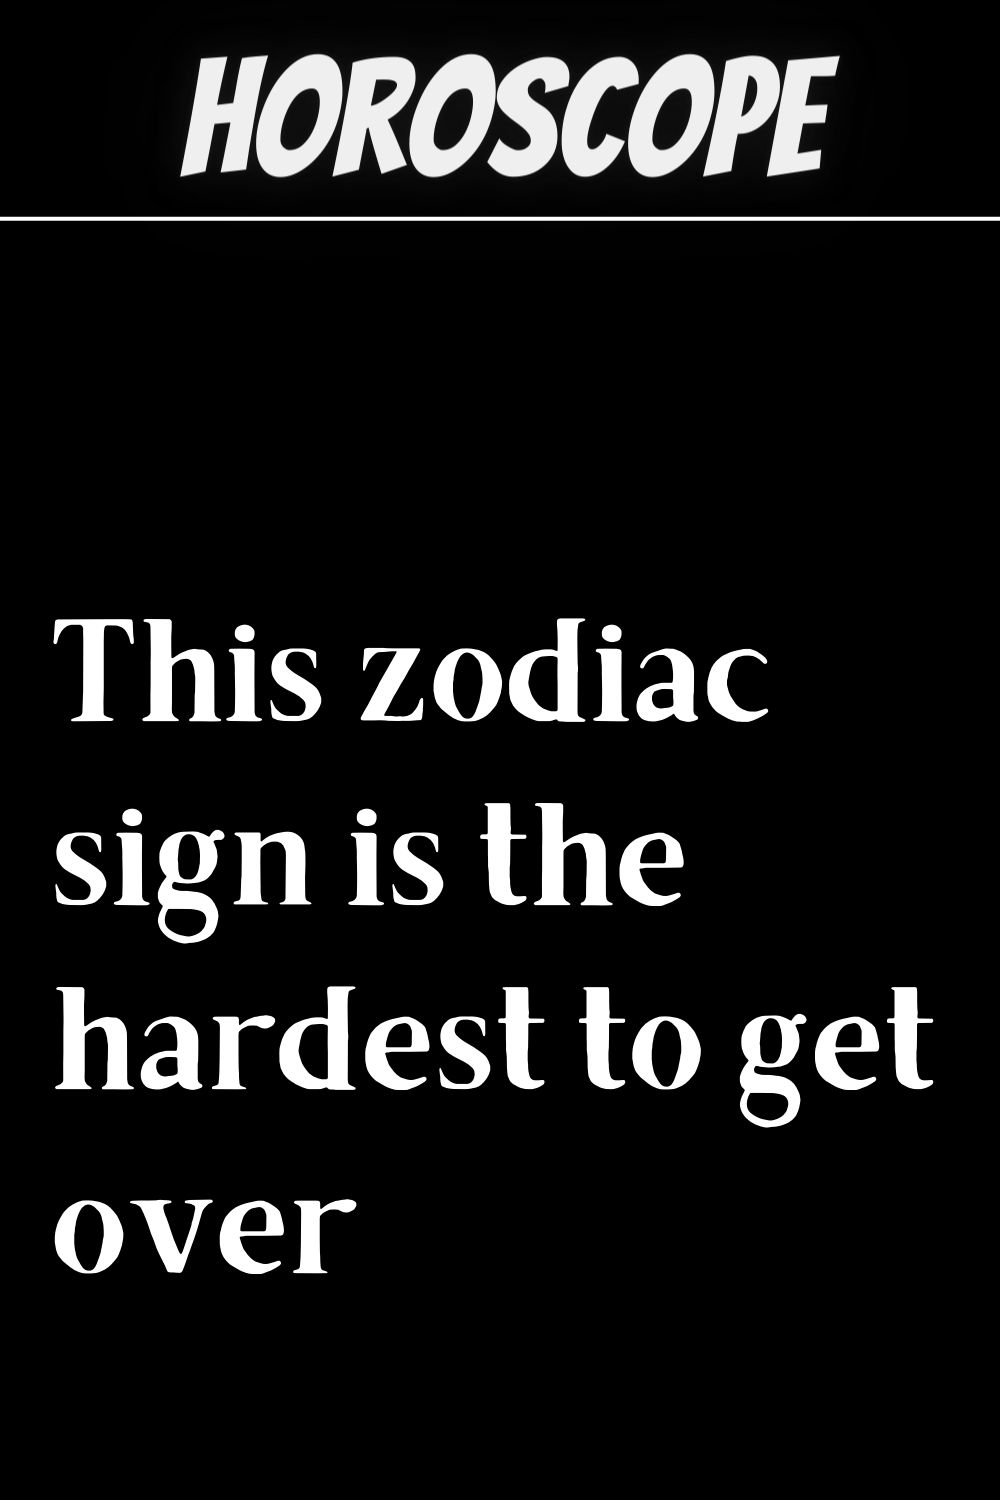 This zodiac sign is the hardest to get over